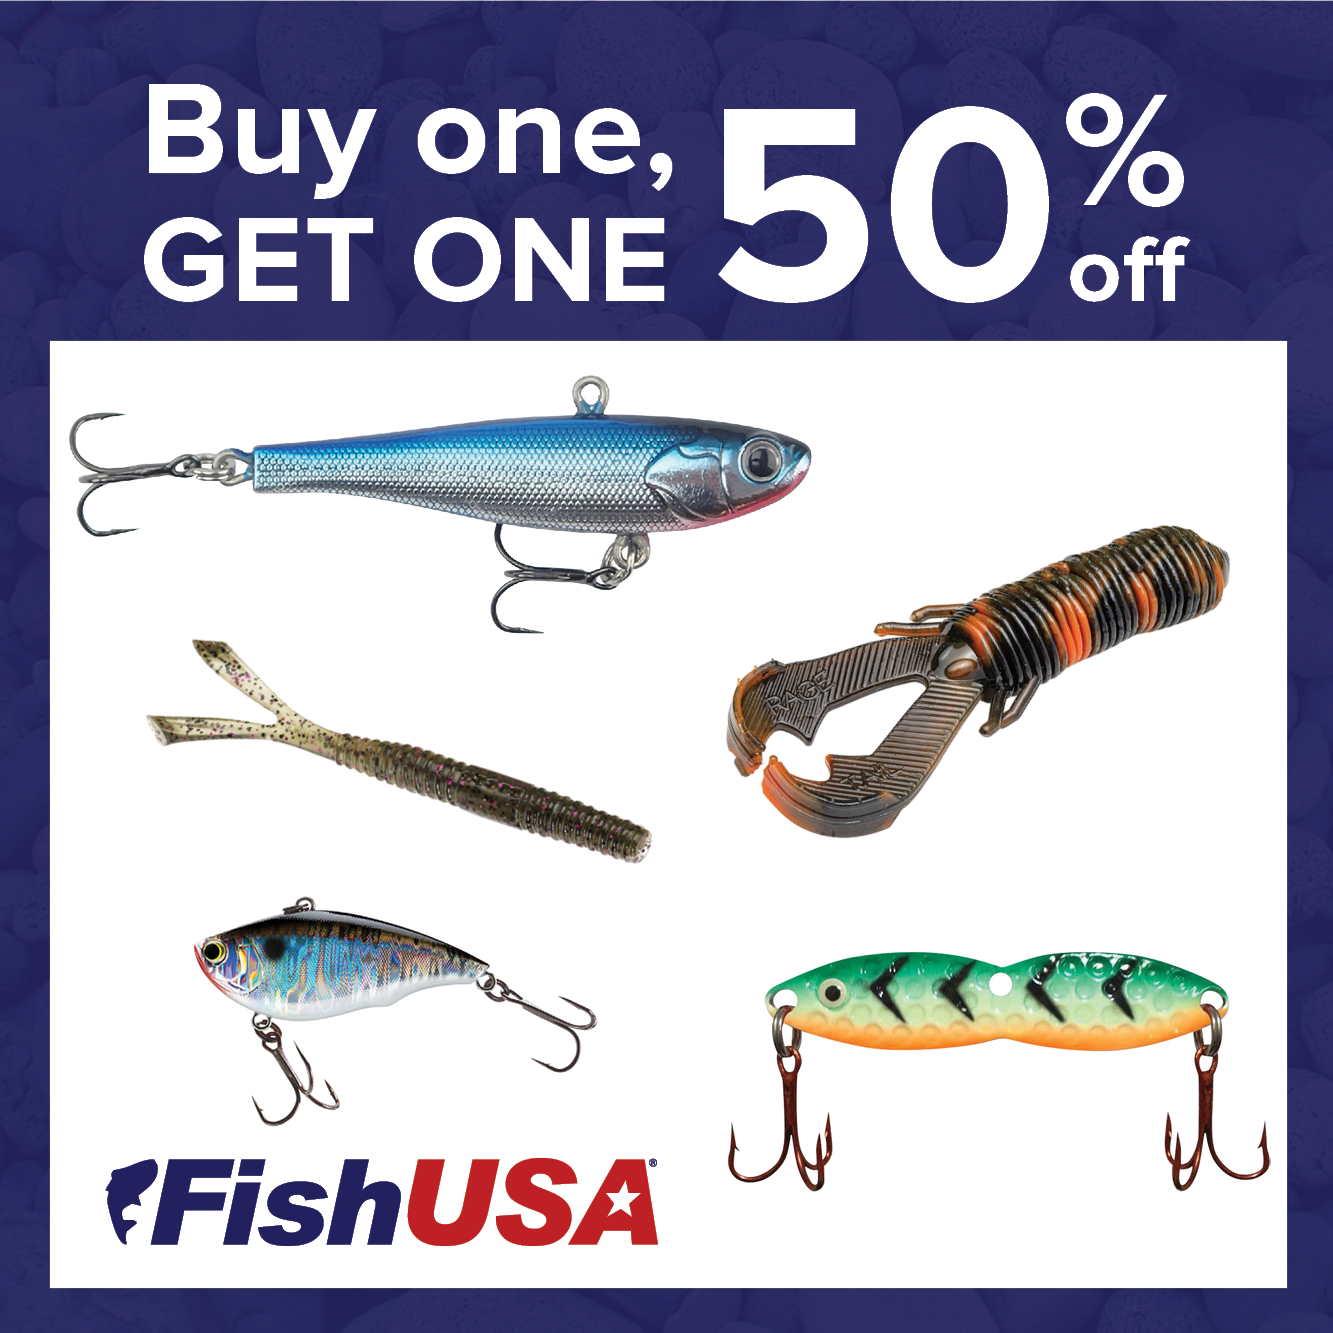 Buy 1, Get 1 at 50% Off on Lures & Baits!